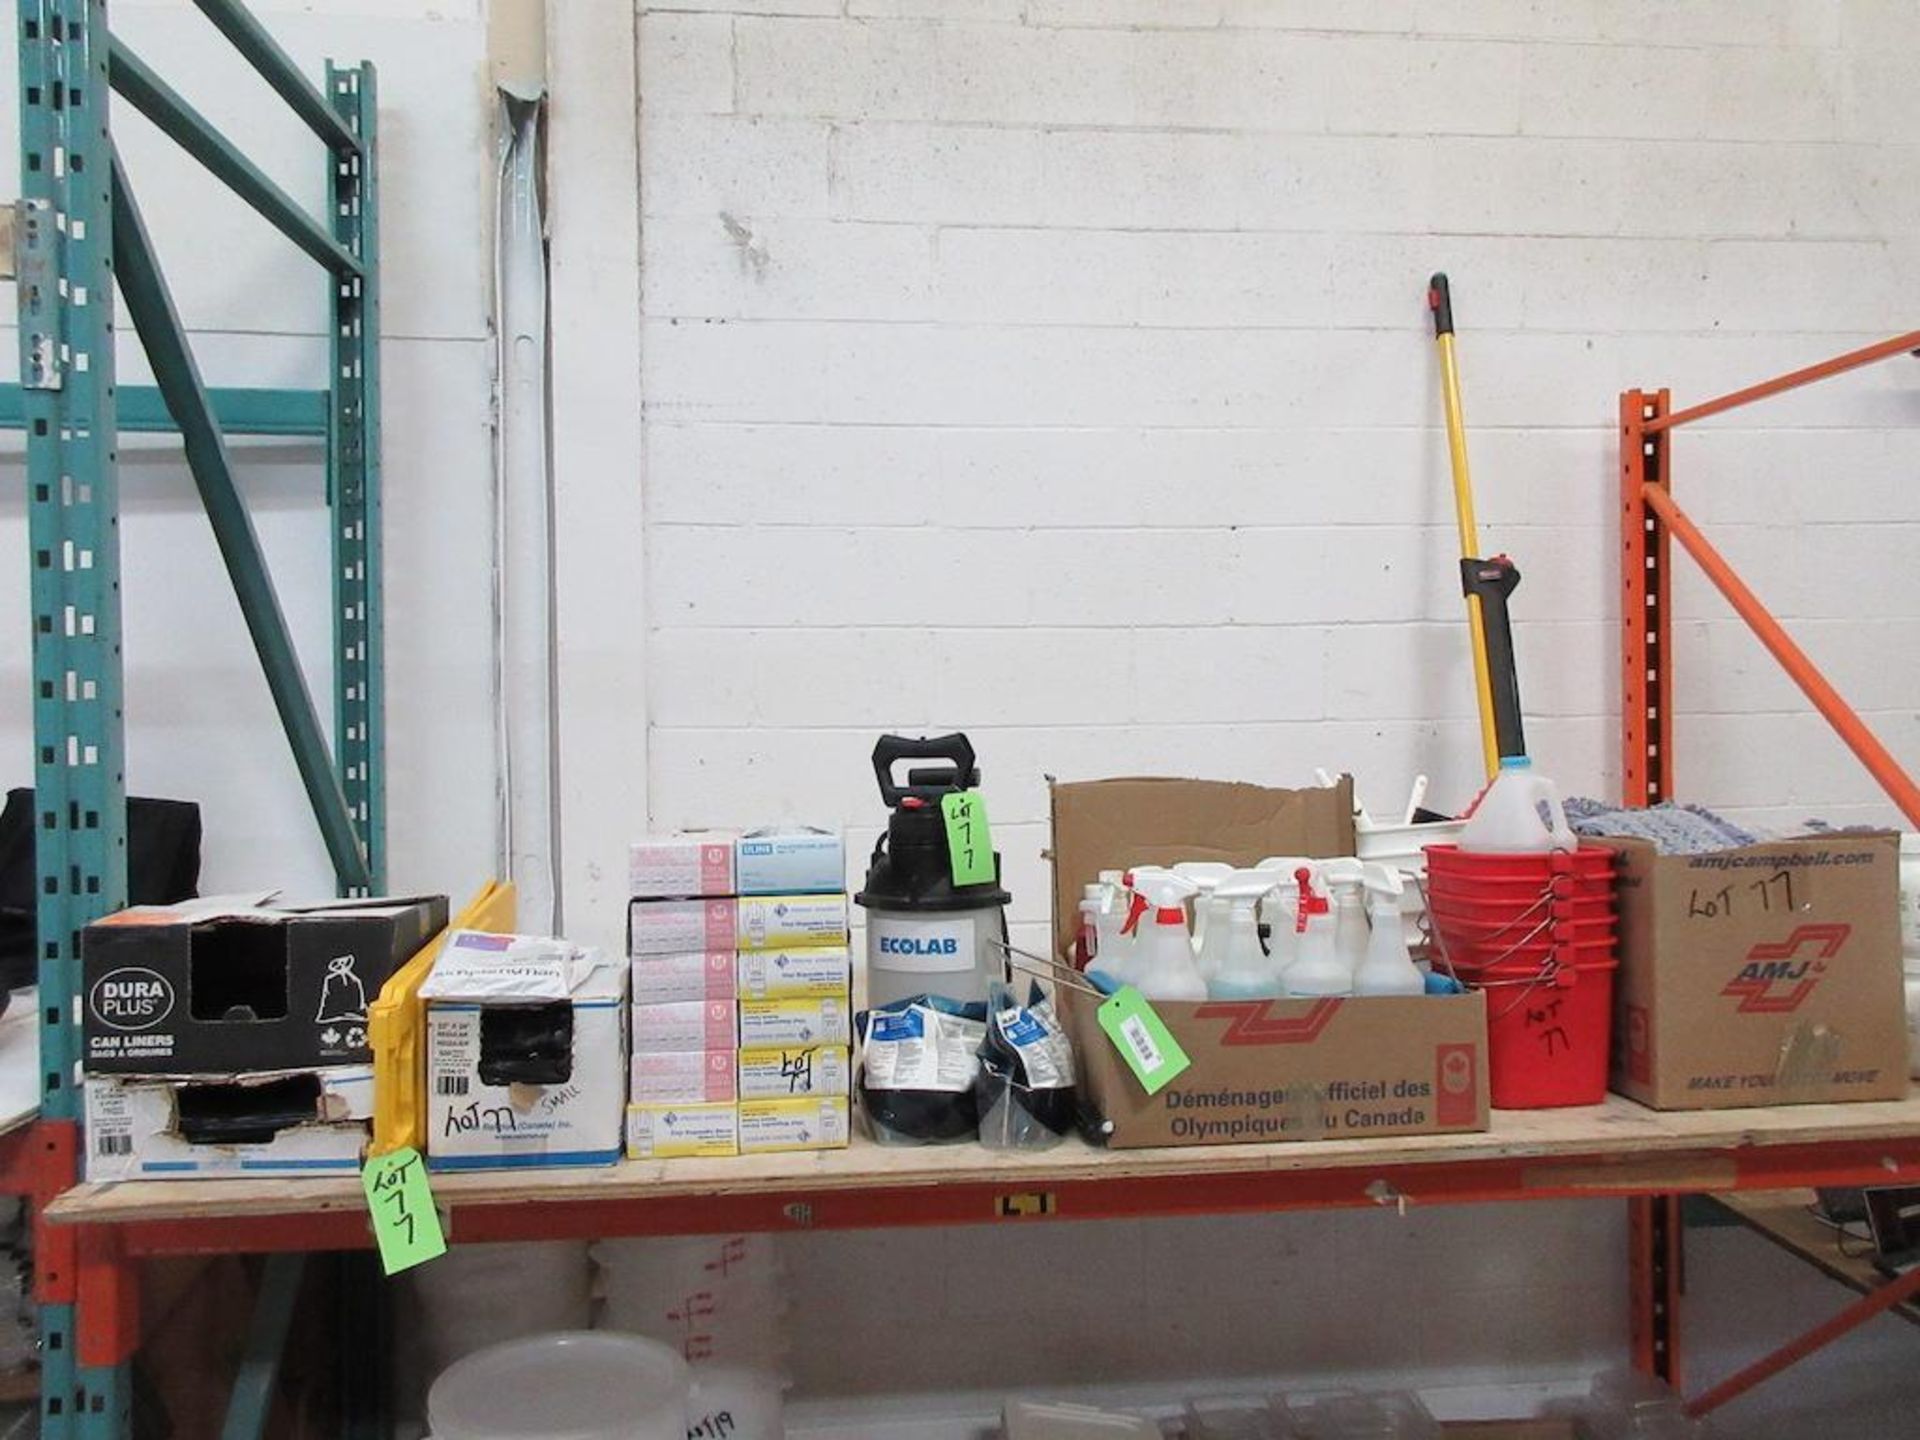 Lot Ecolab sprayer, chemicals, cleaning supplies etc.